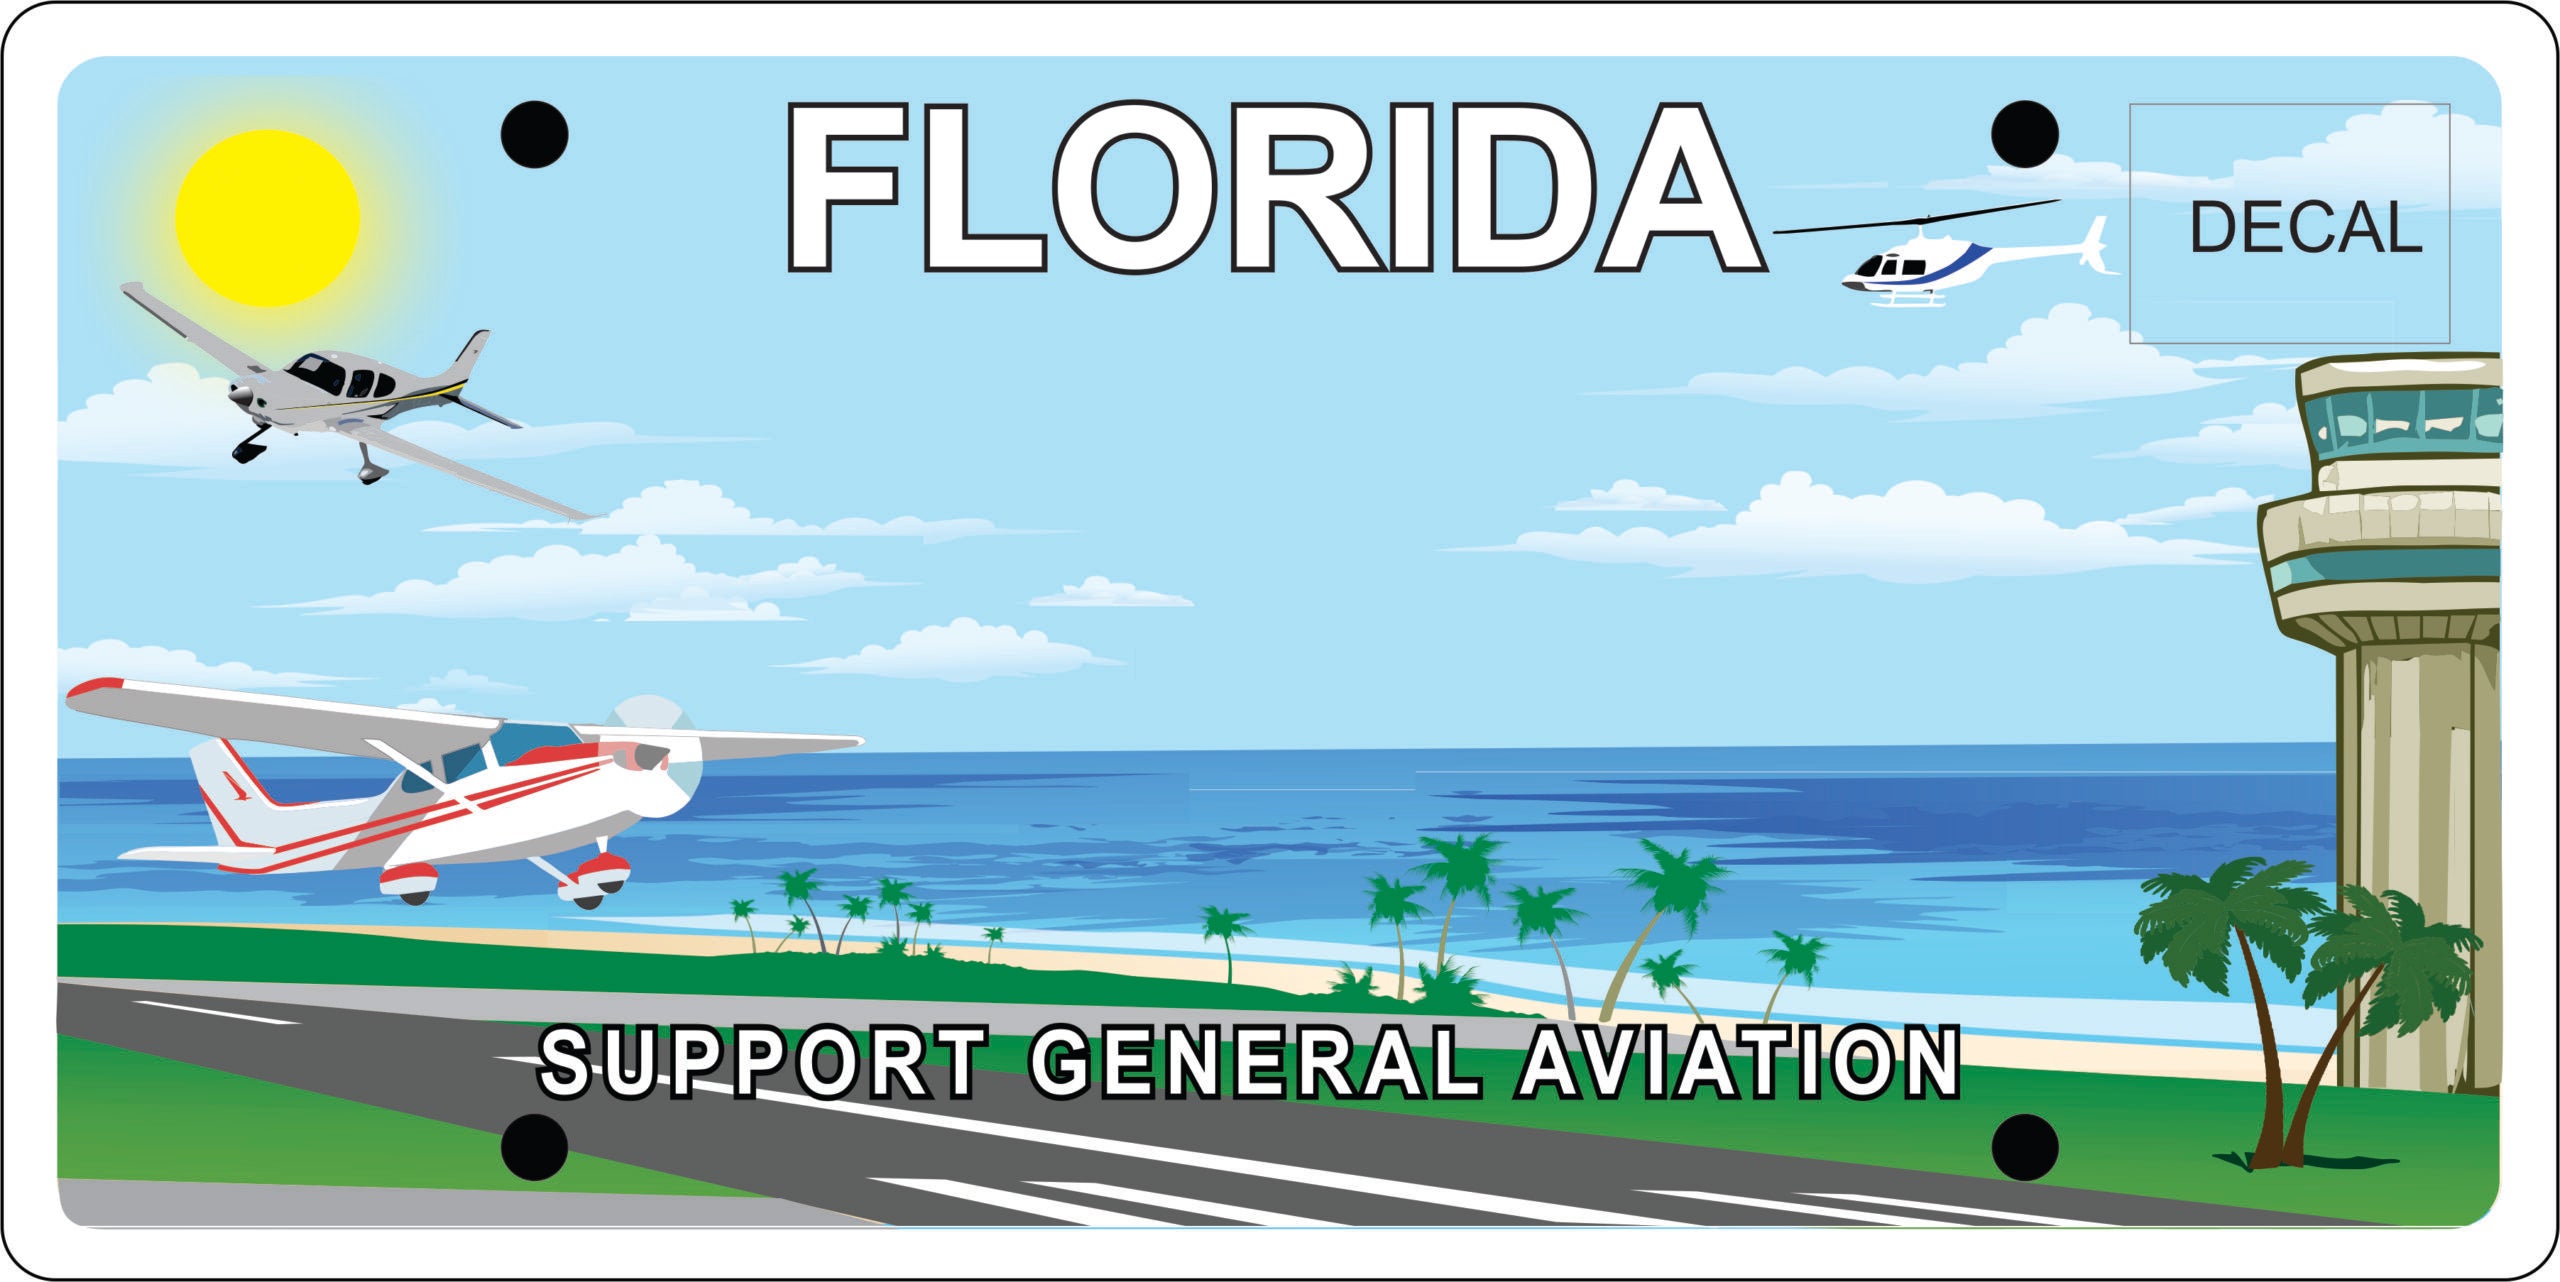 Sales of Aviation License Plates to Begin in Florida Later This Year